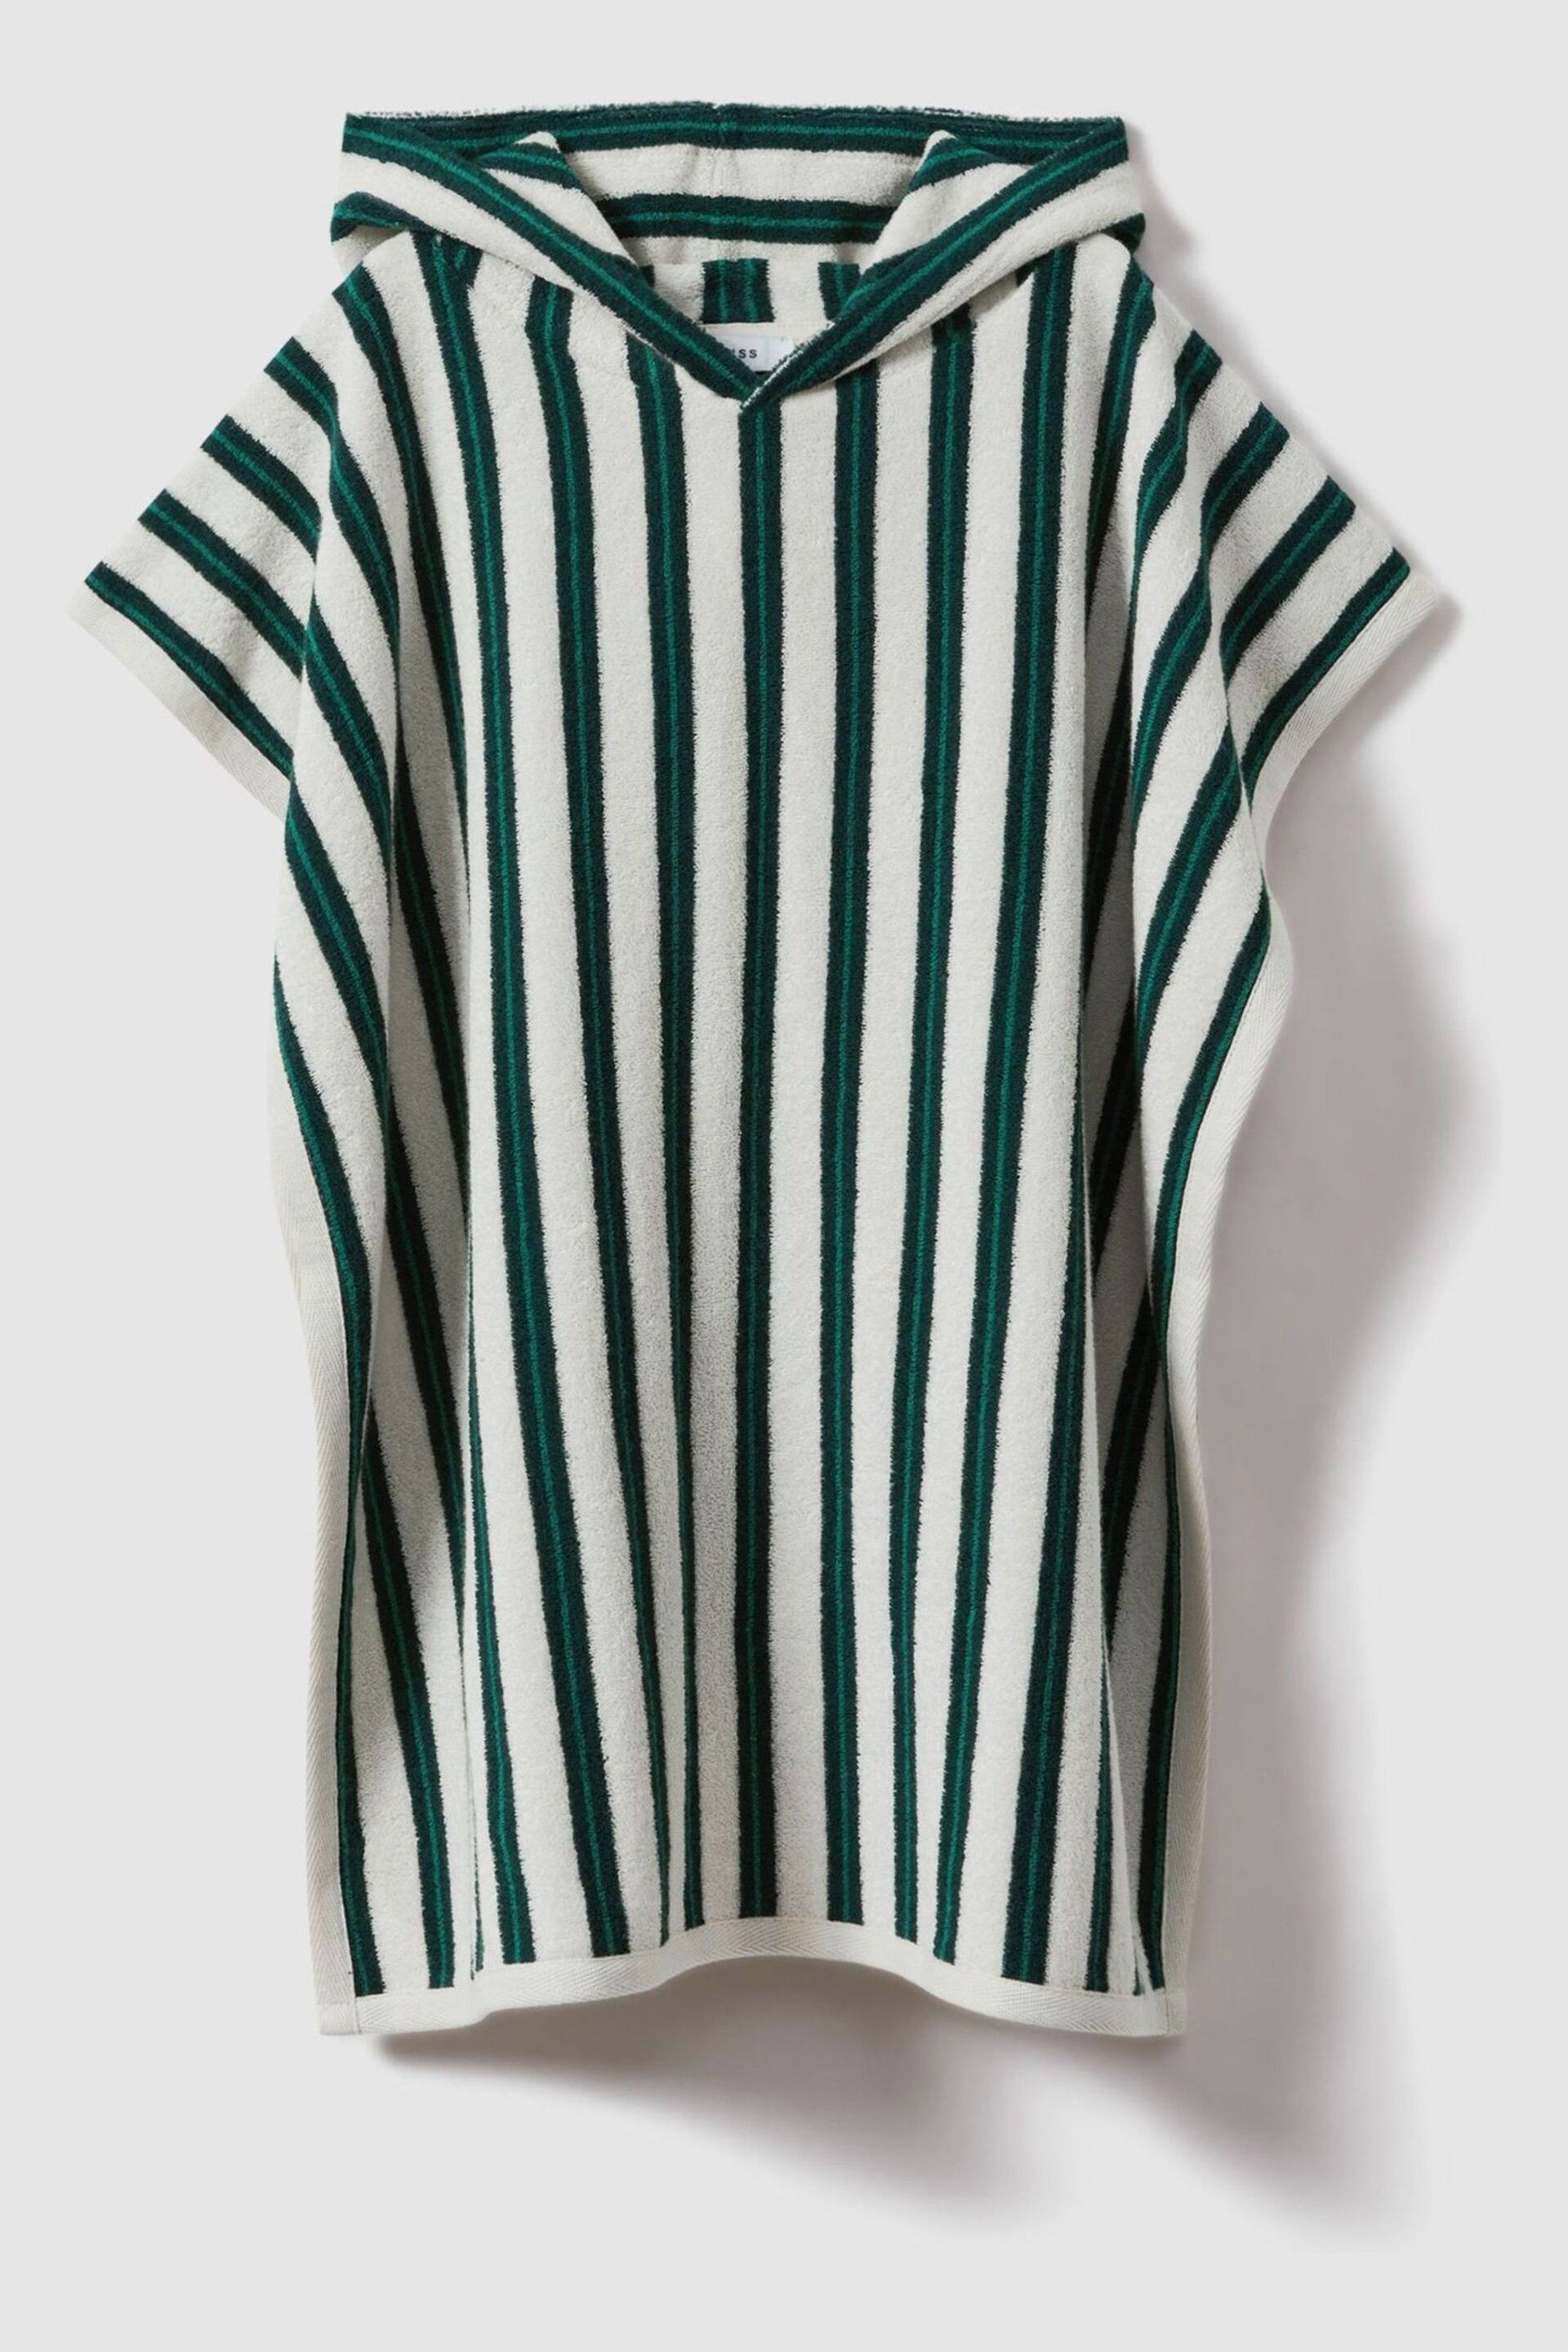 Reiss Green/White Ray Hooded Striped Poncho - Image 2 of 4